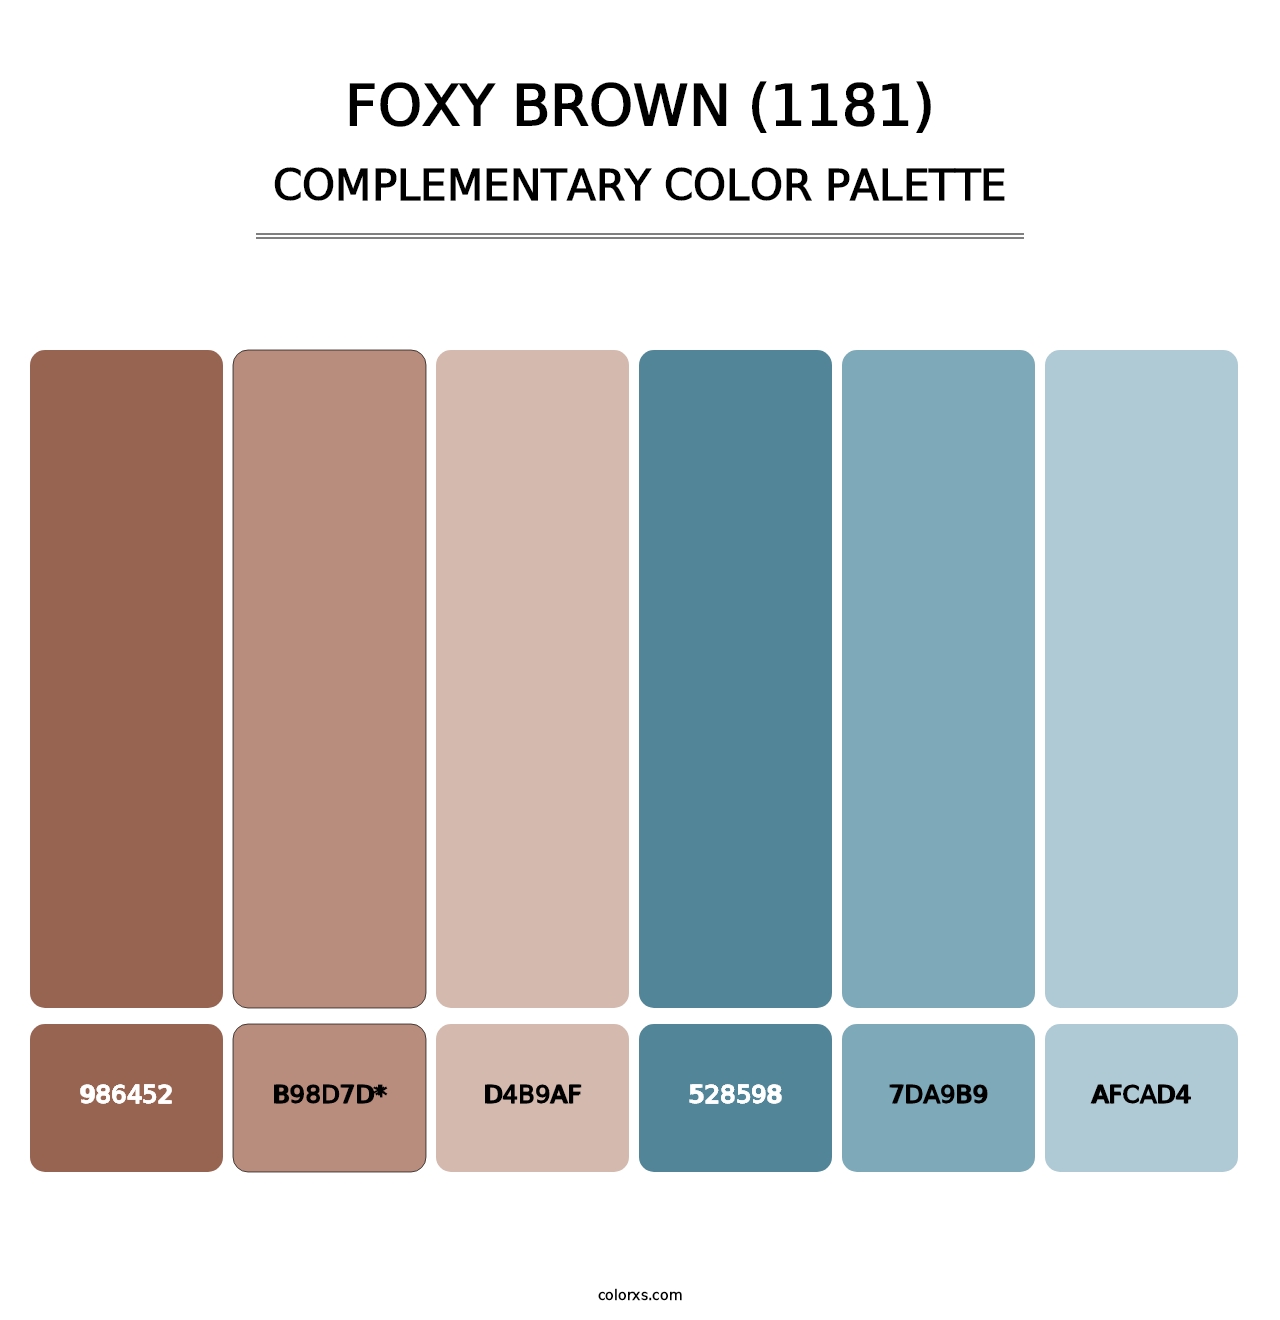 Foxy Brown (1181) - Complementary Color Palette